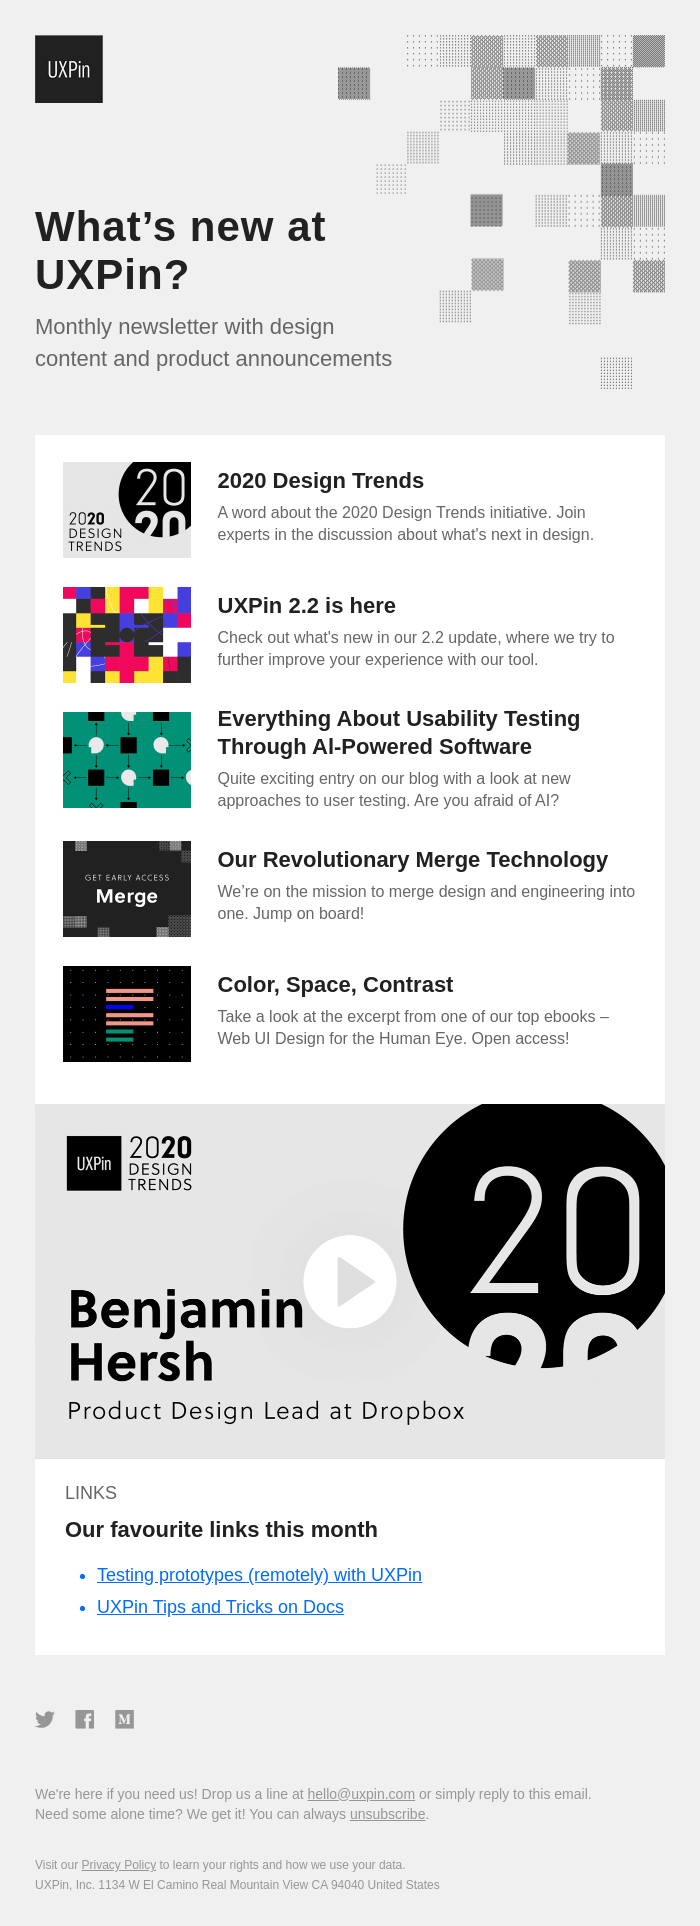 2020 Design Trends, new grids, AI usability testing, and more